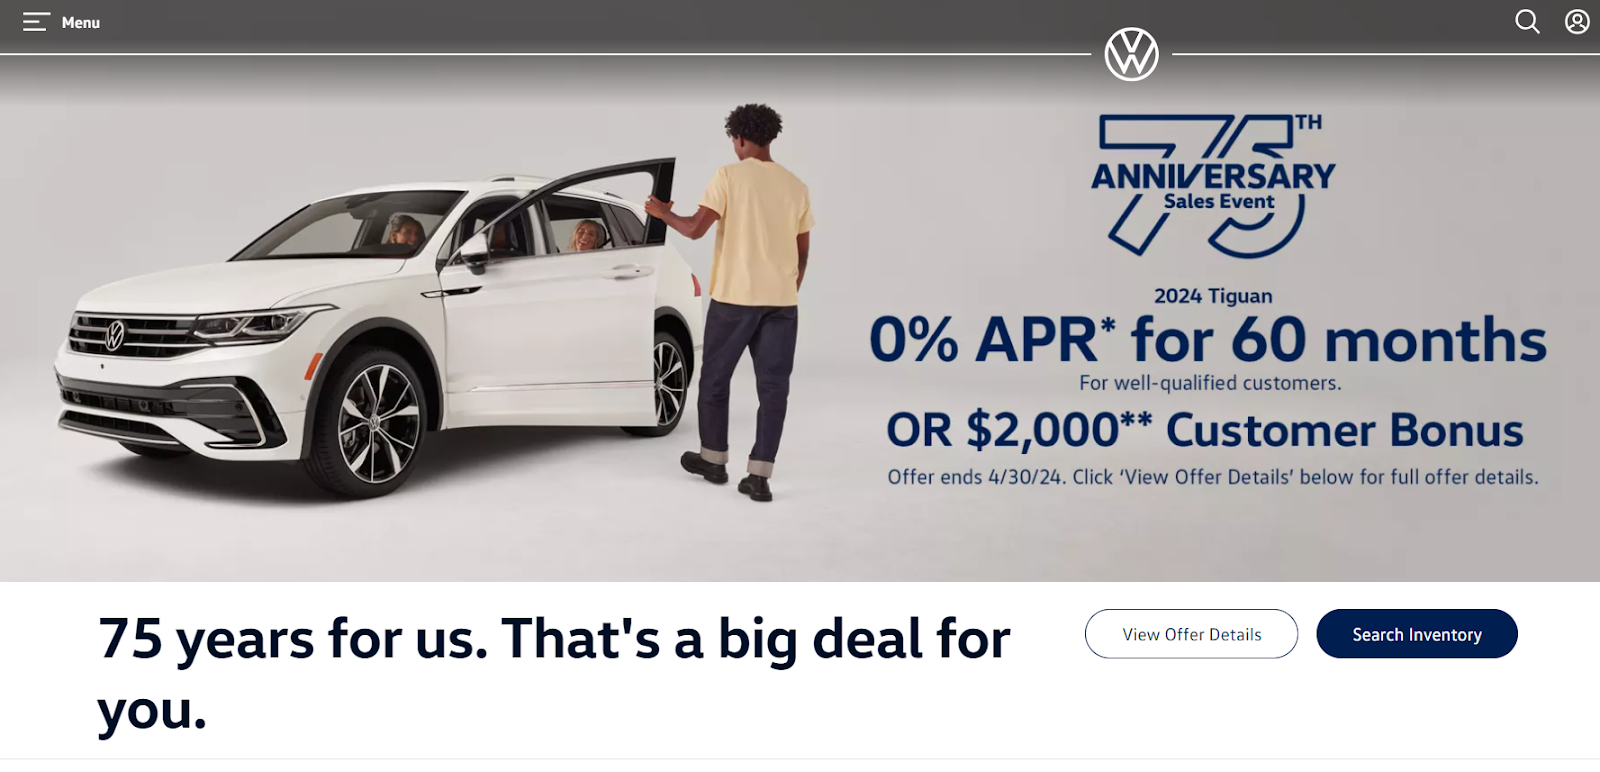 Volkswagen uses AI to guess what people will buy